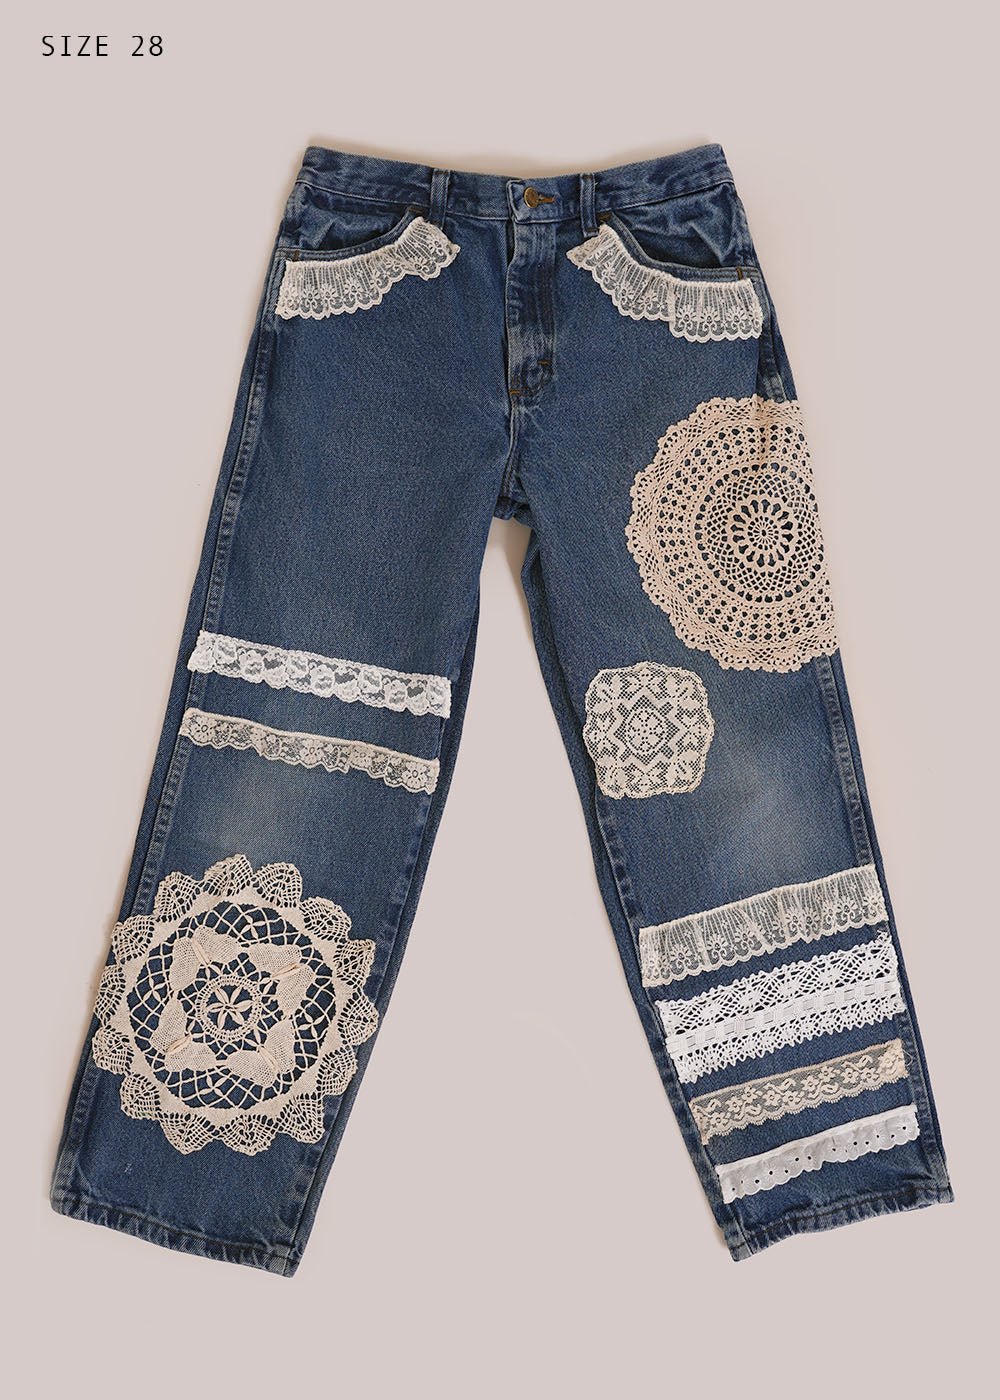 Our Hollywood trousers in light-weighted denim fabric from